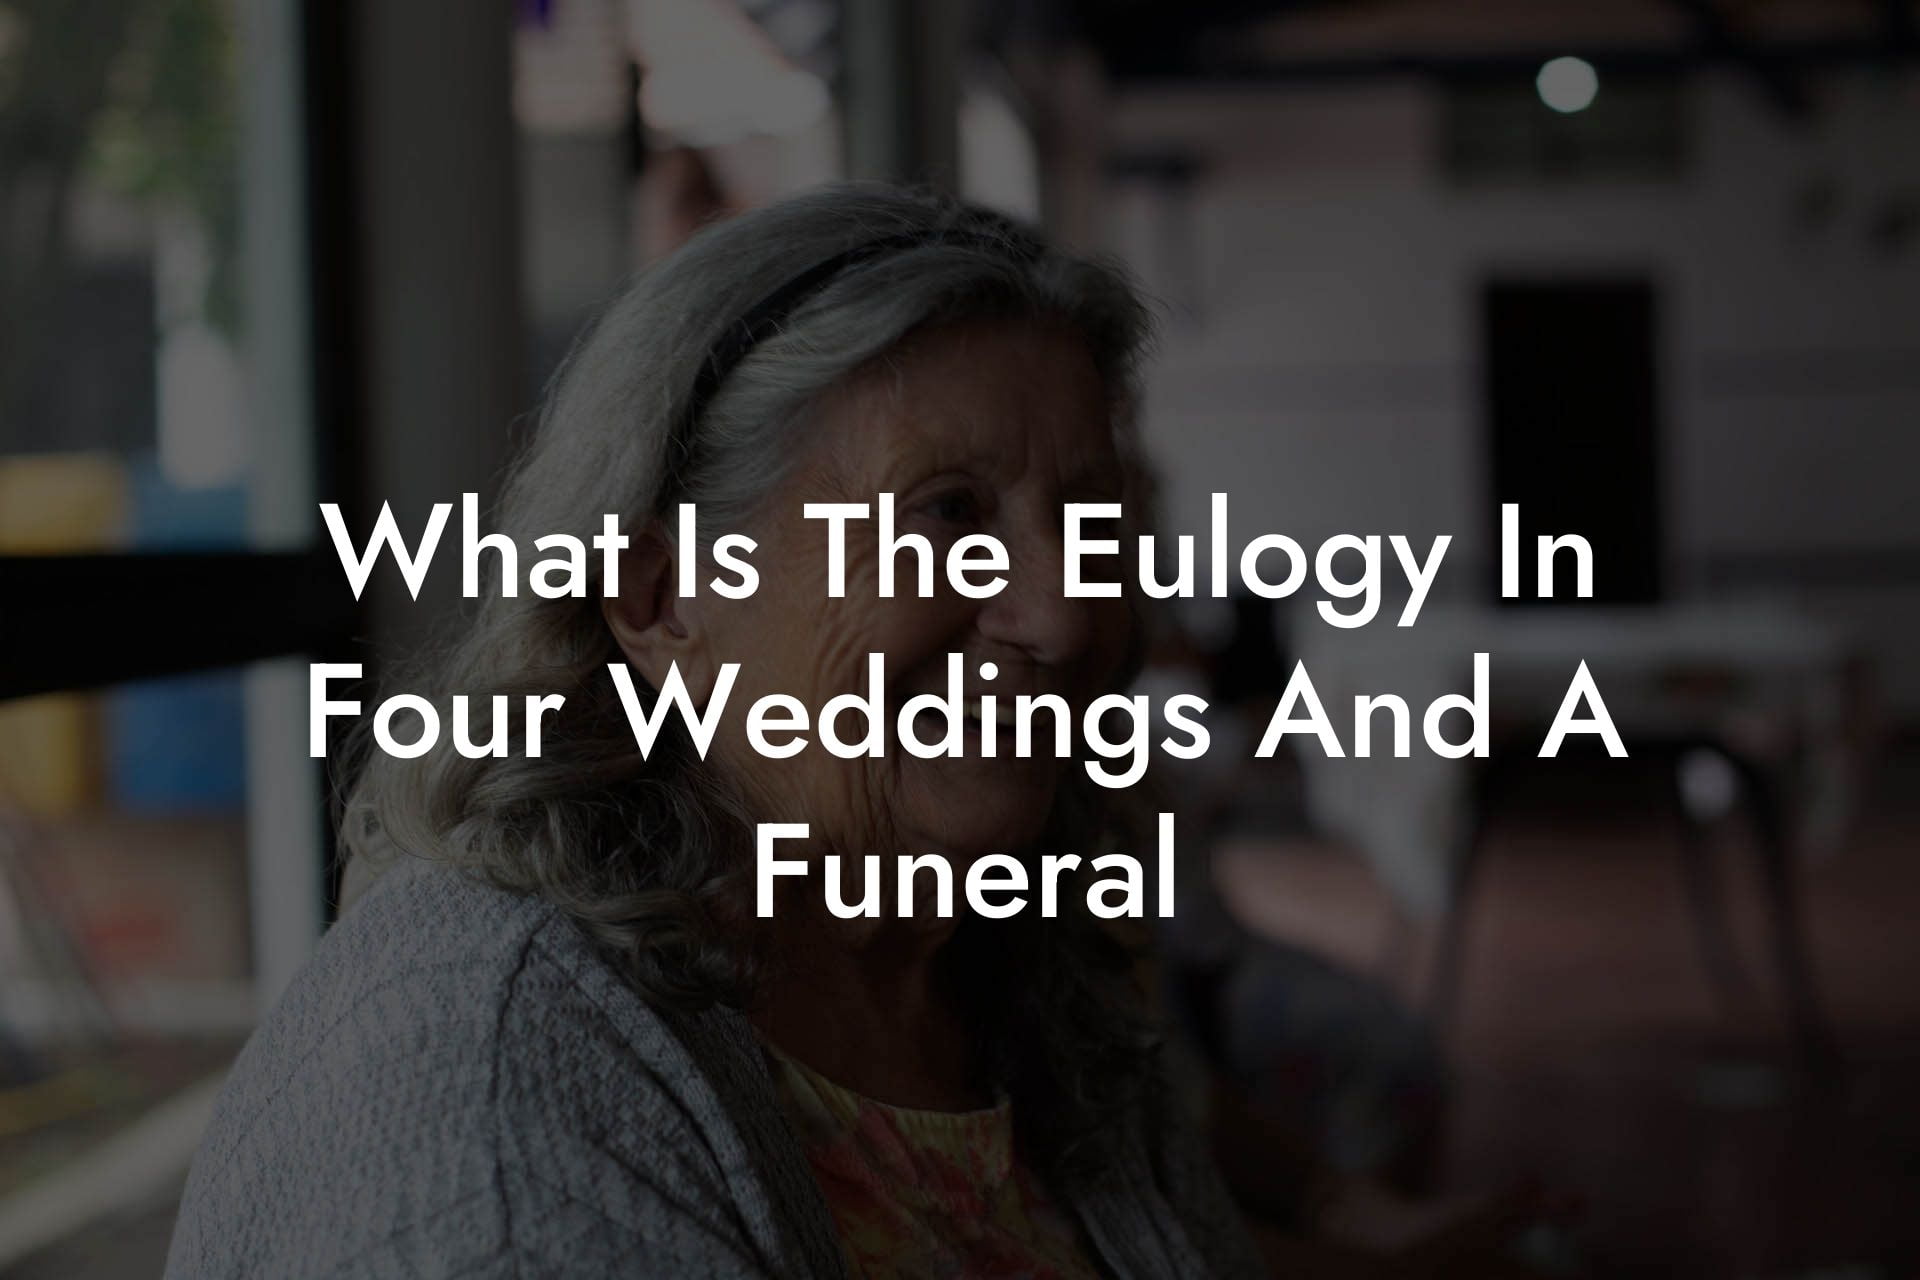 What Is The Eulogy In Four Weddings And A Funeral